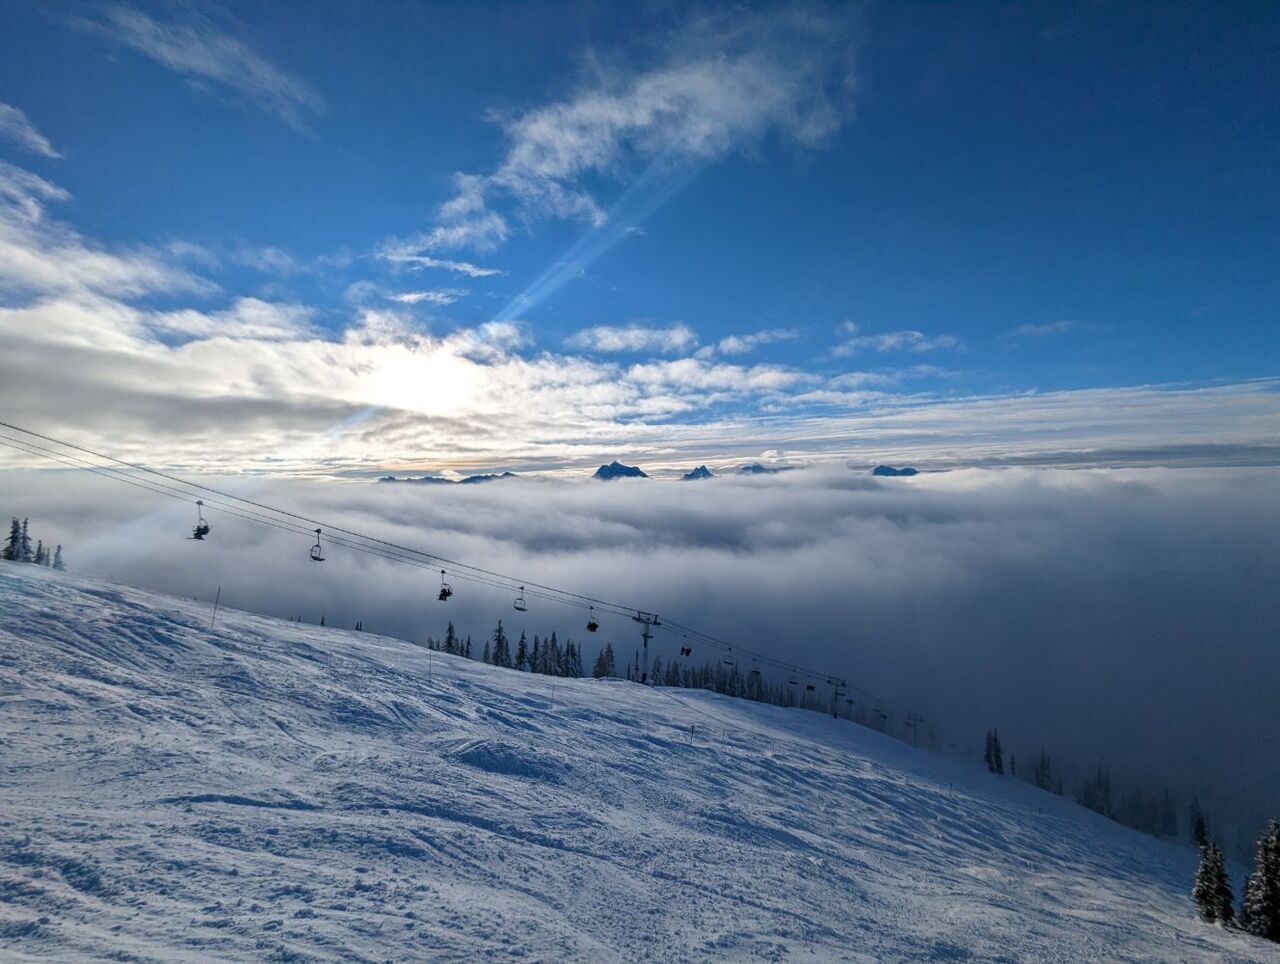 An inversion layer dominated the first two days of skiing.  In this photo you can see the cloud layer that formed mid-mountain.